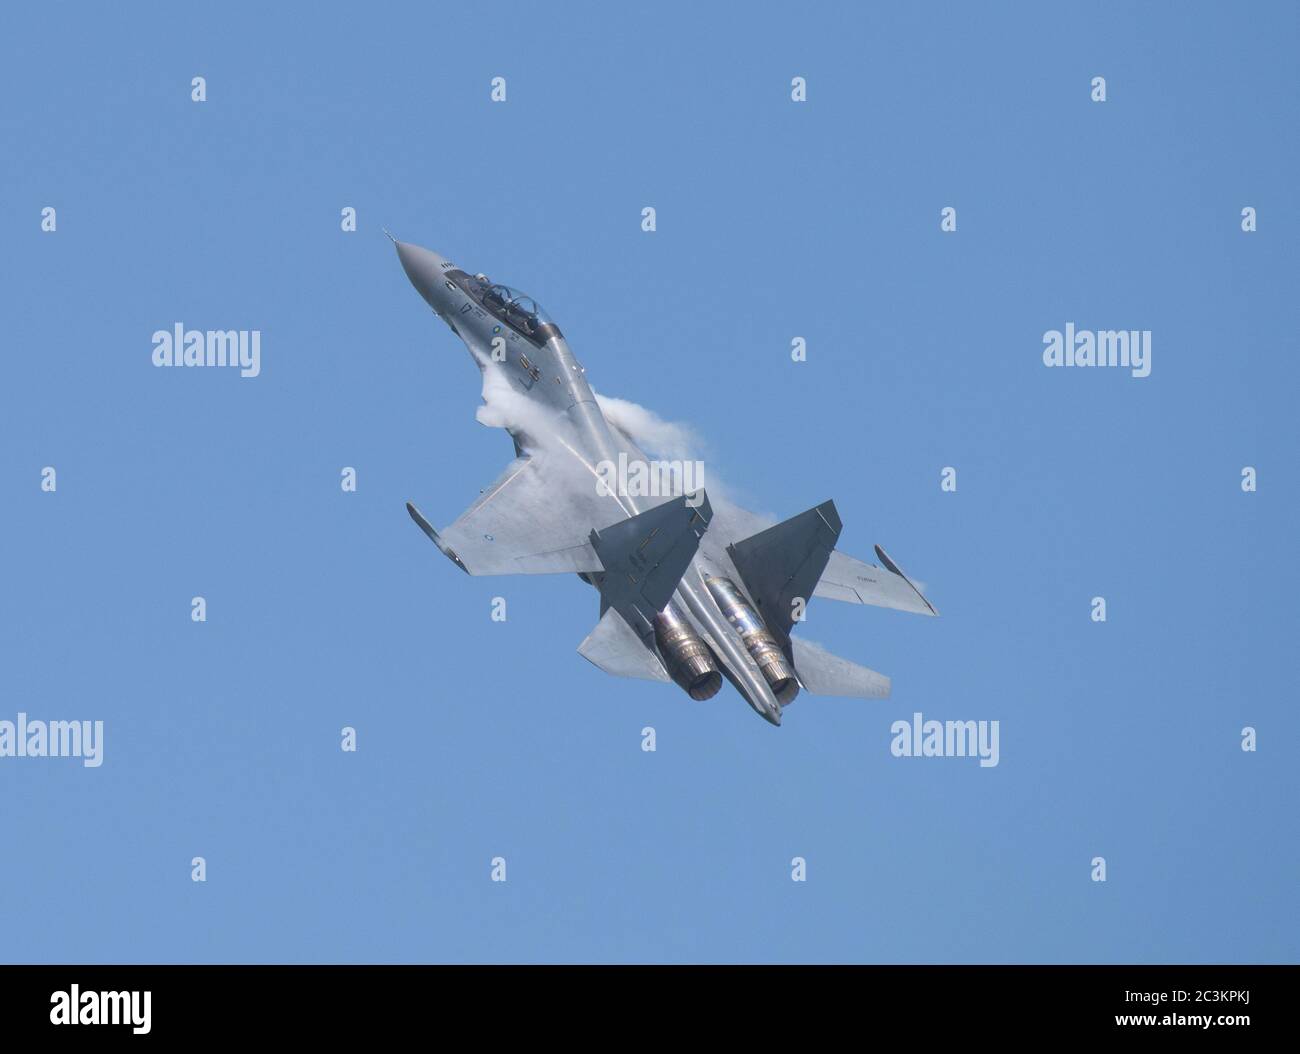 Singapore - February 16, 2016: Sukhoi Su‑30MKM from Royal Malaysian Air Force during its performance at Singapore Airshow at Changi Exhibition Centre Stock Photo